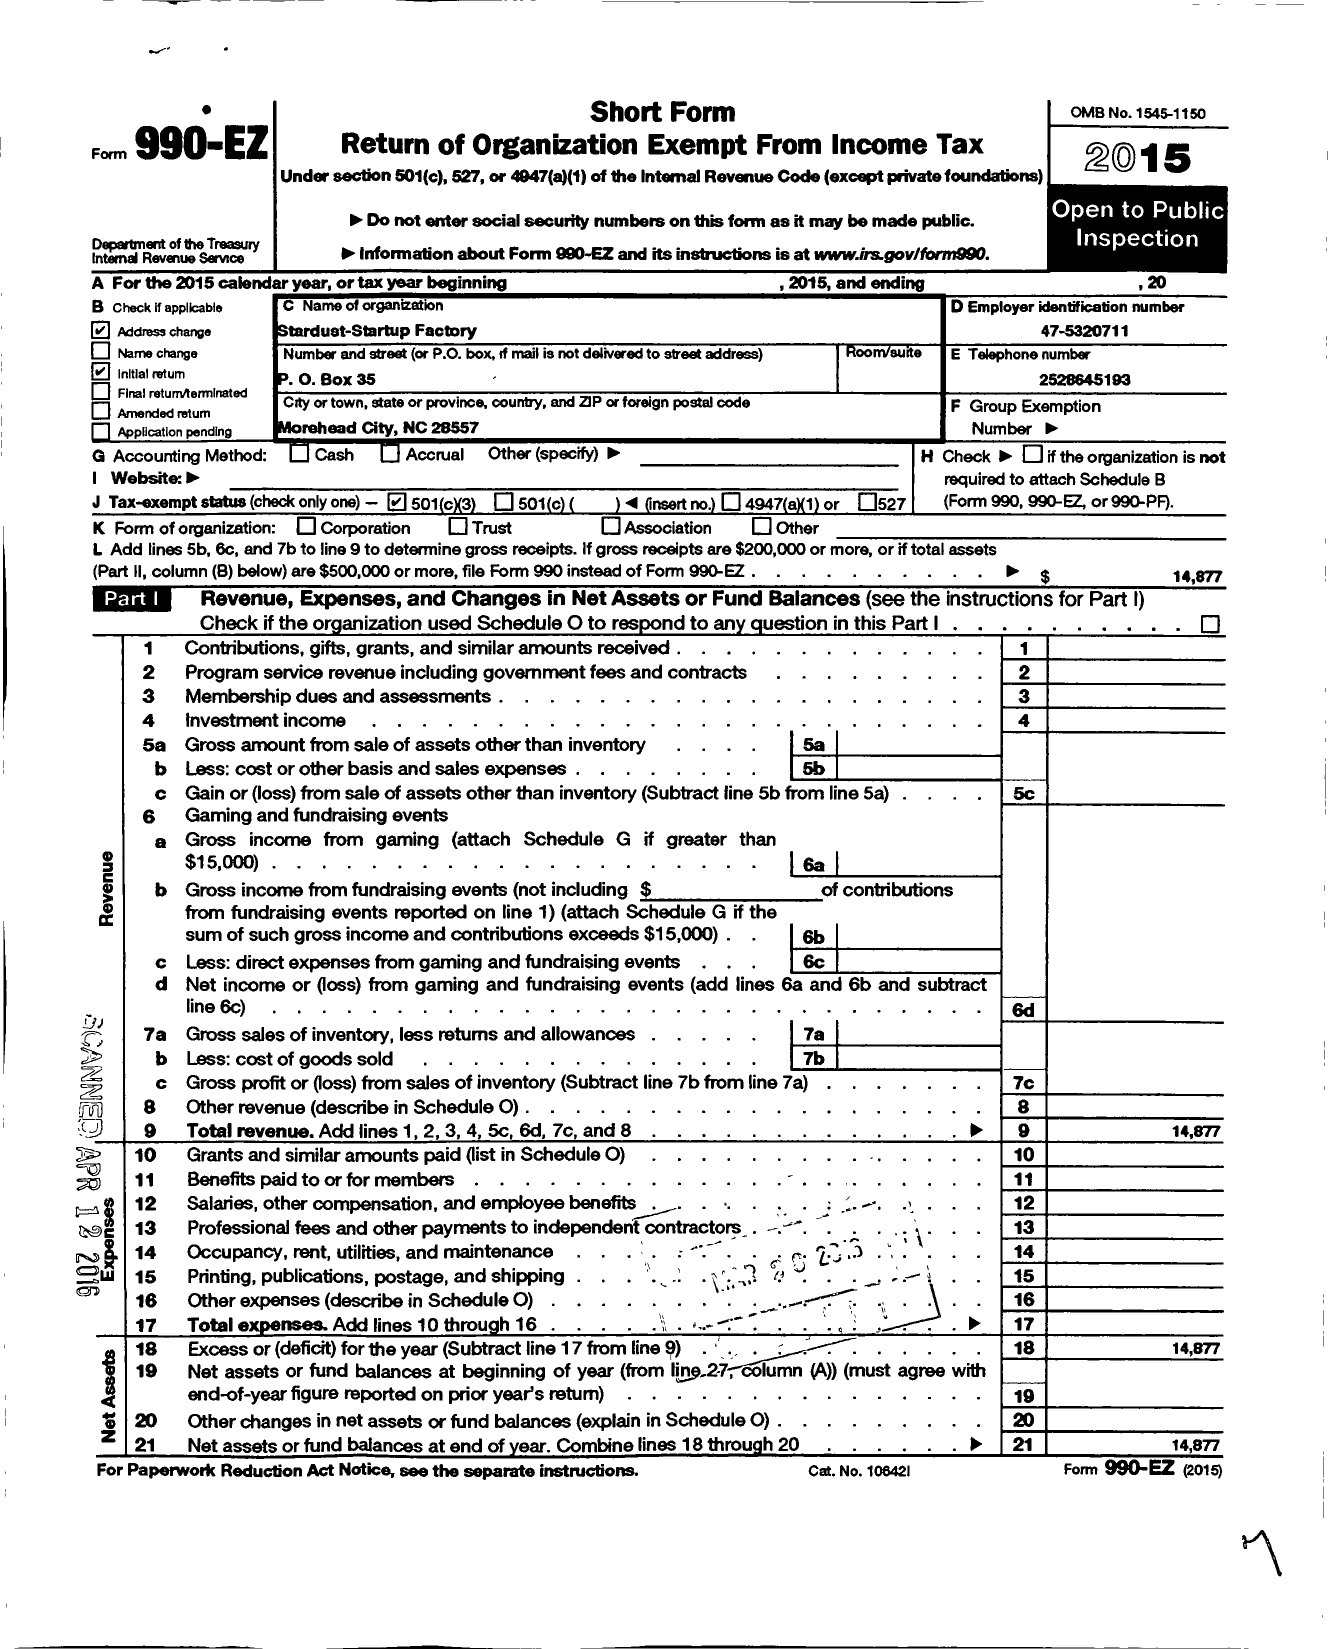 Image of first page of 2015 Form 990EZ for Stardust-Startup Factory